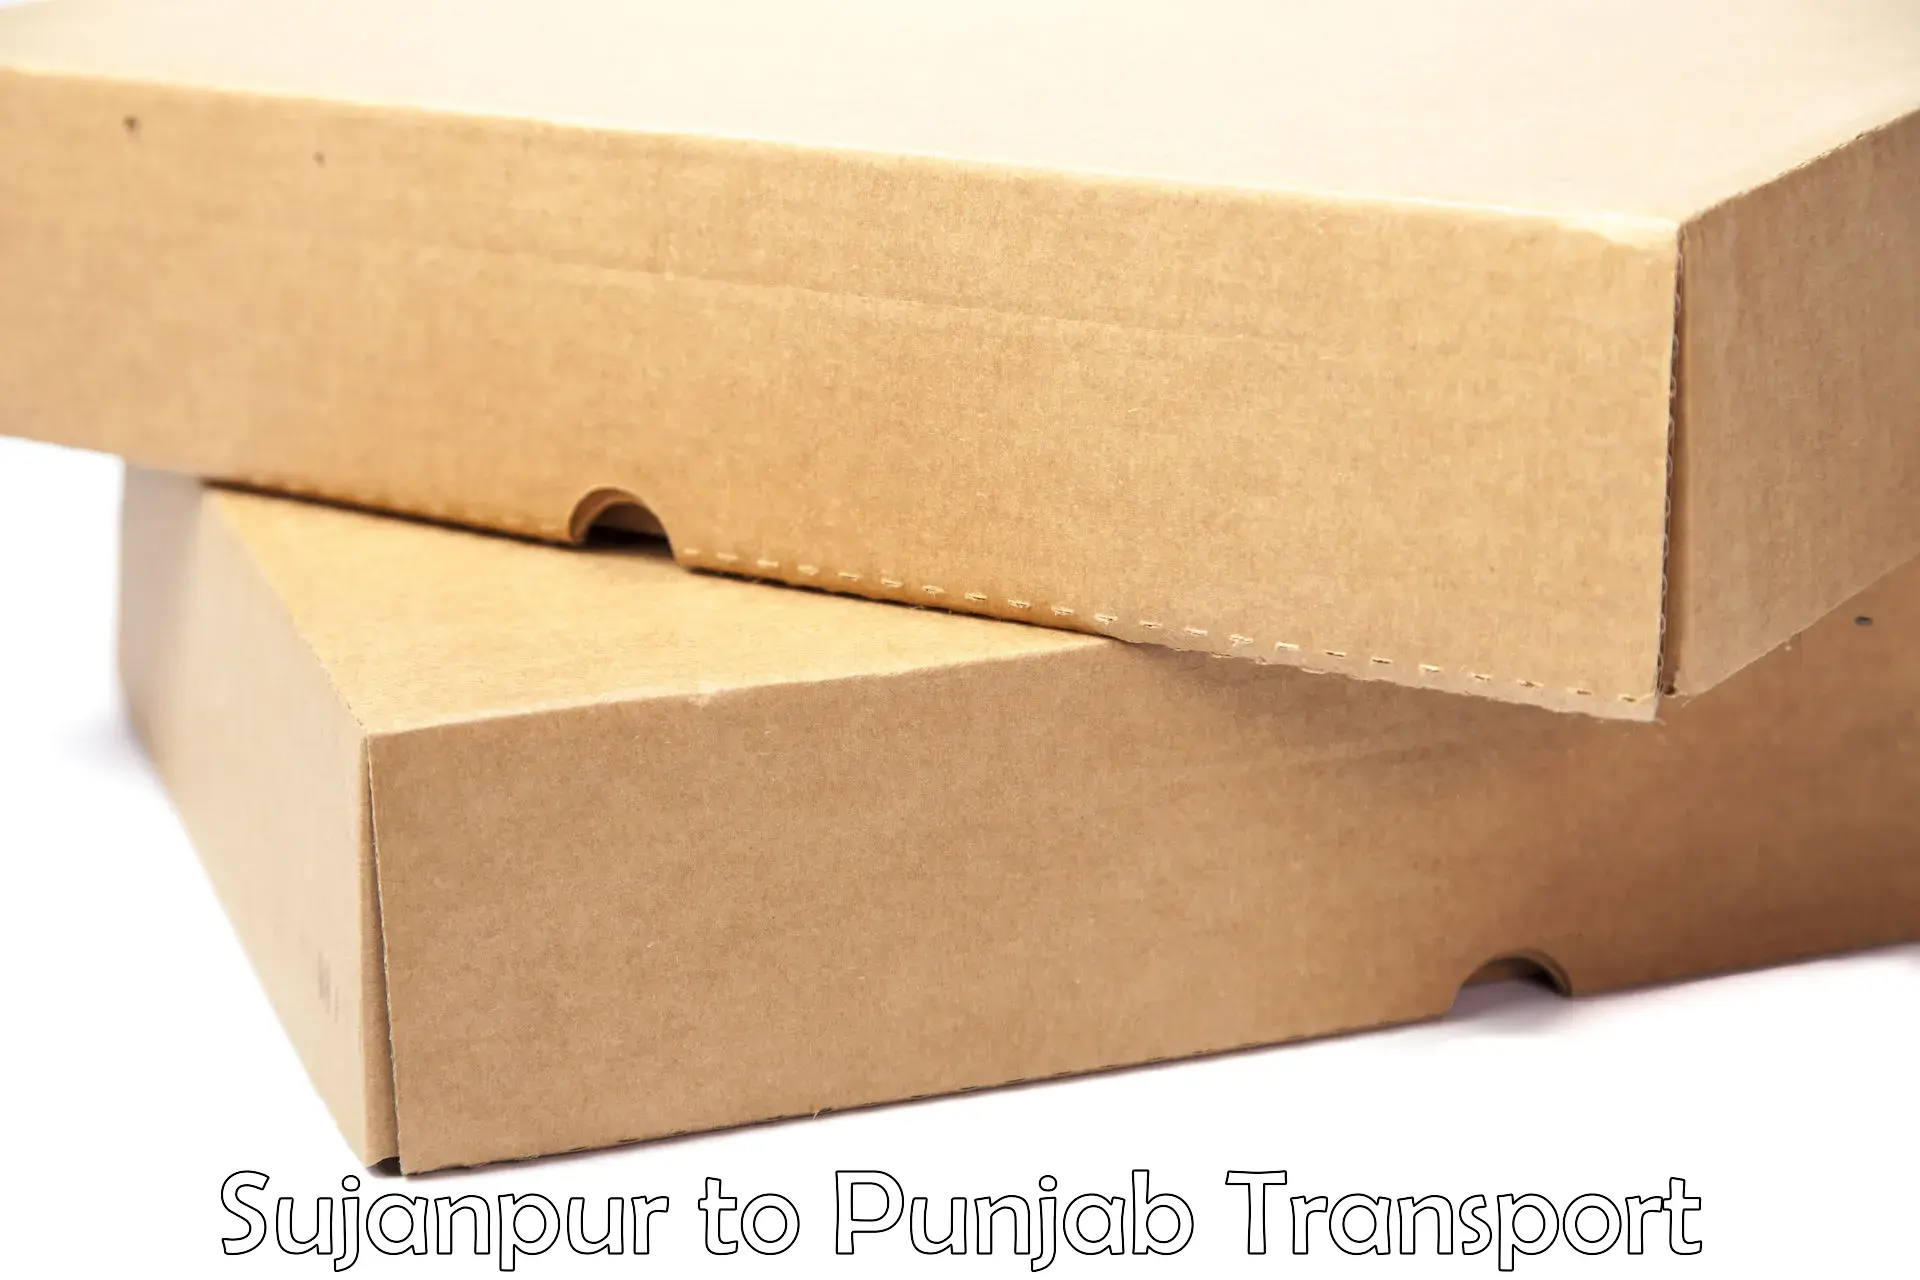 Transportation services Sujanpur to Malout